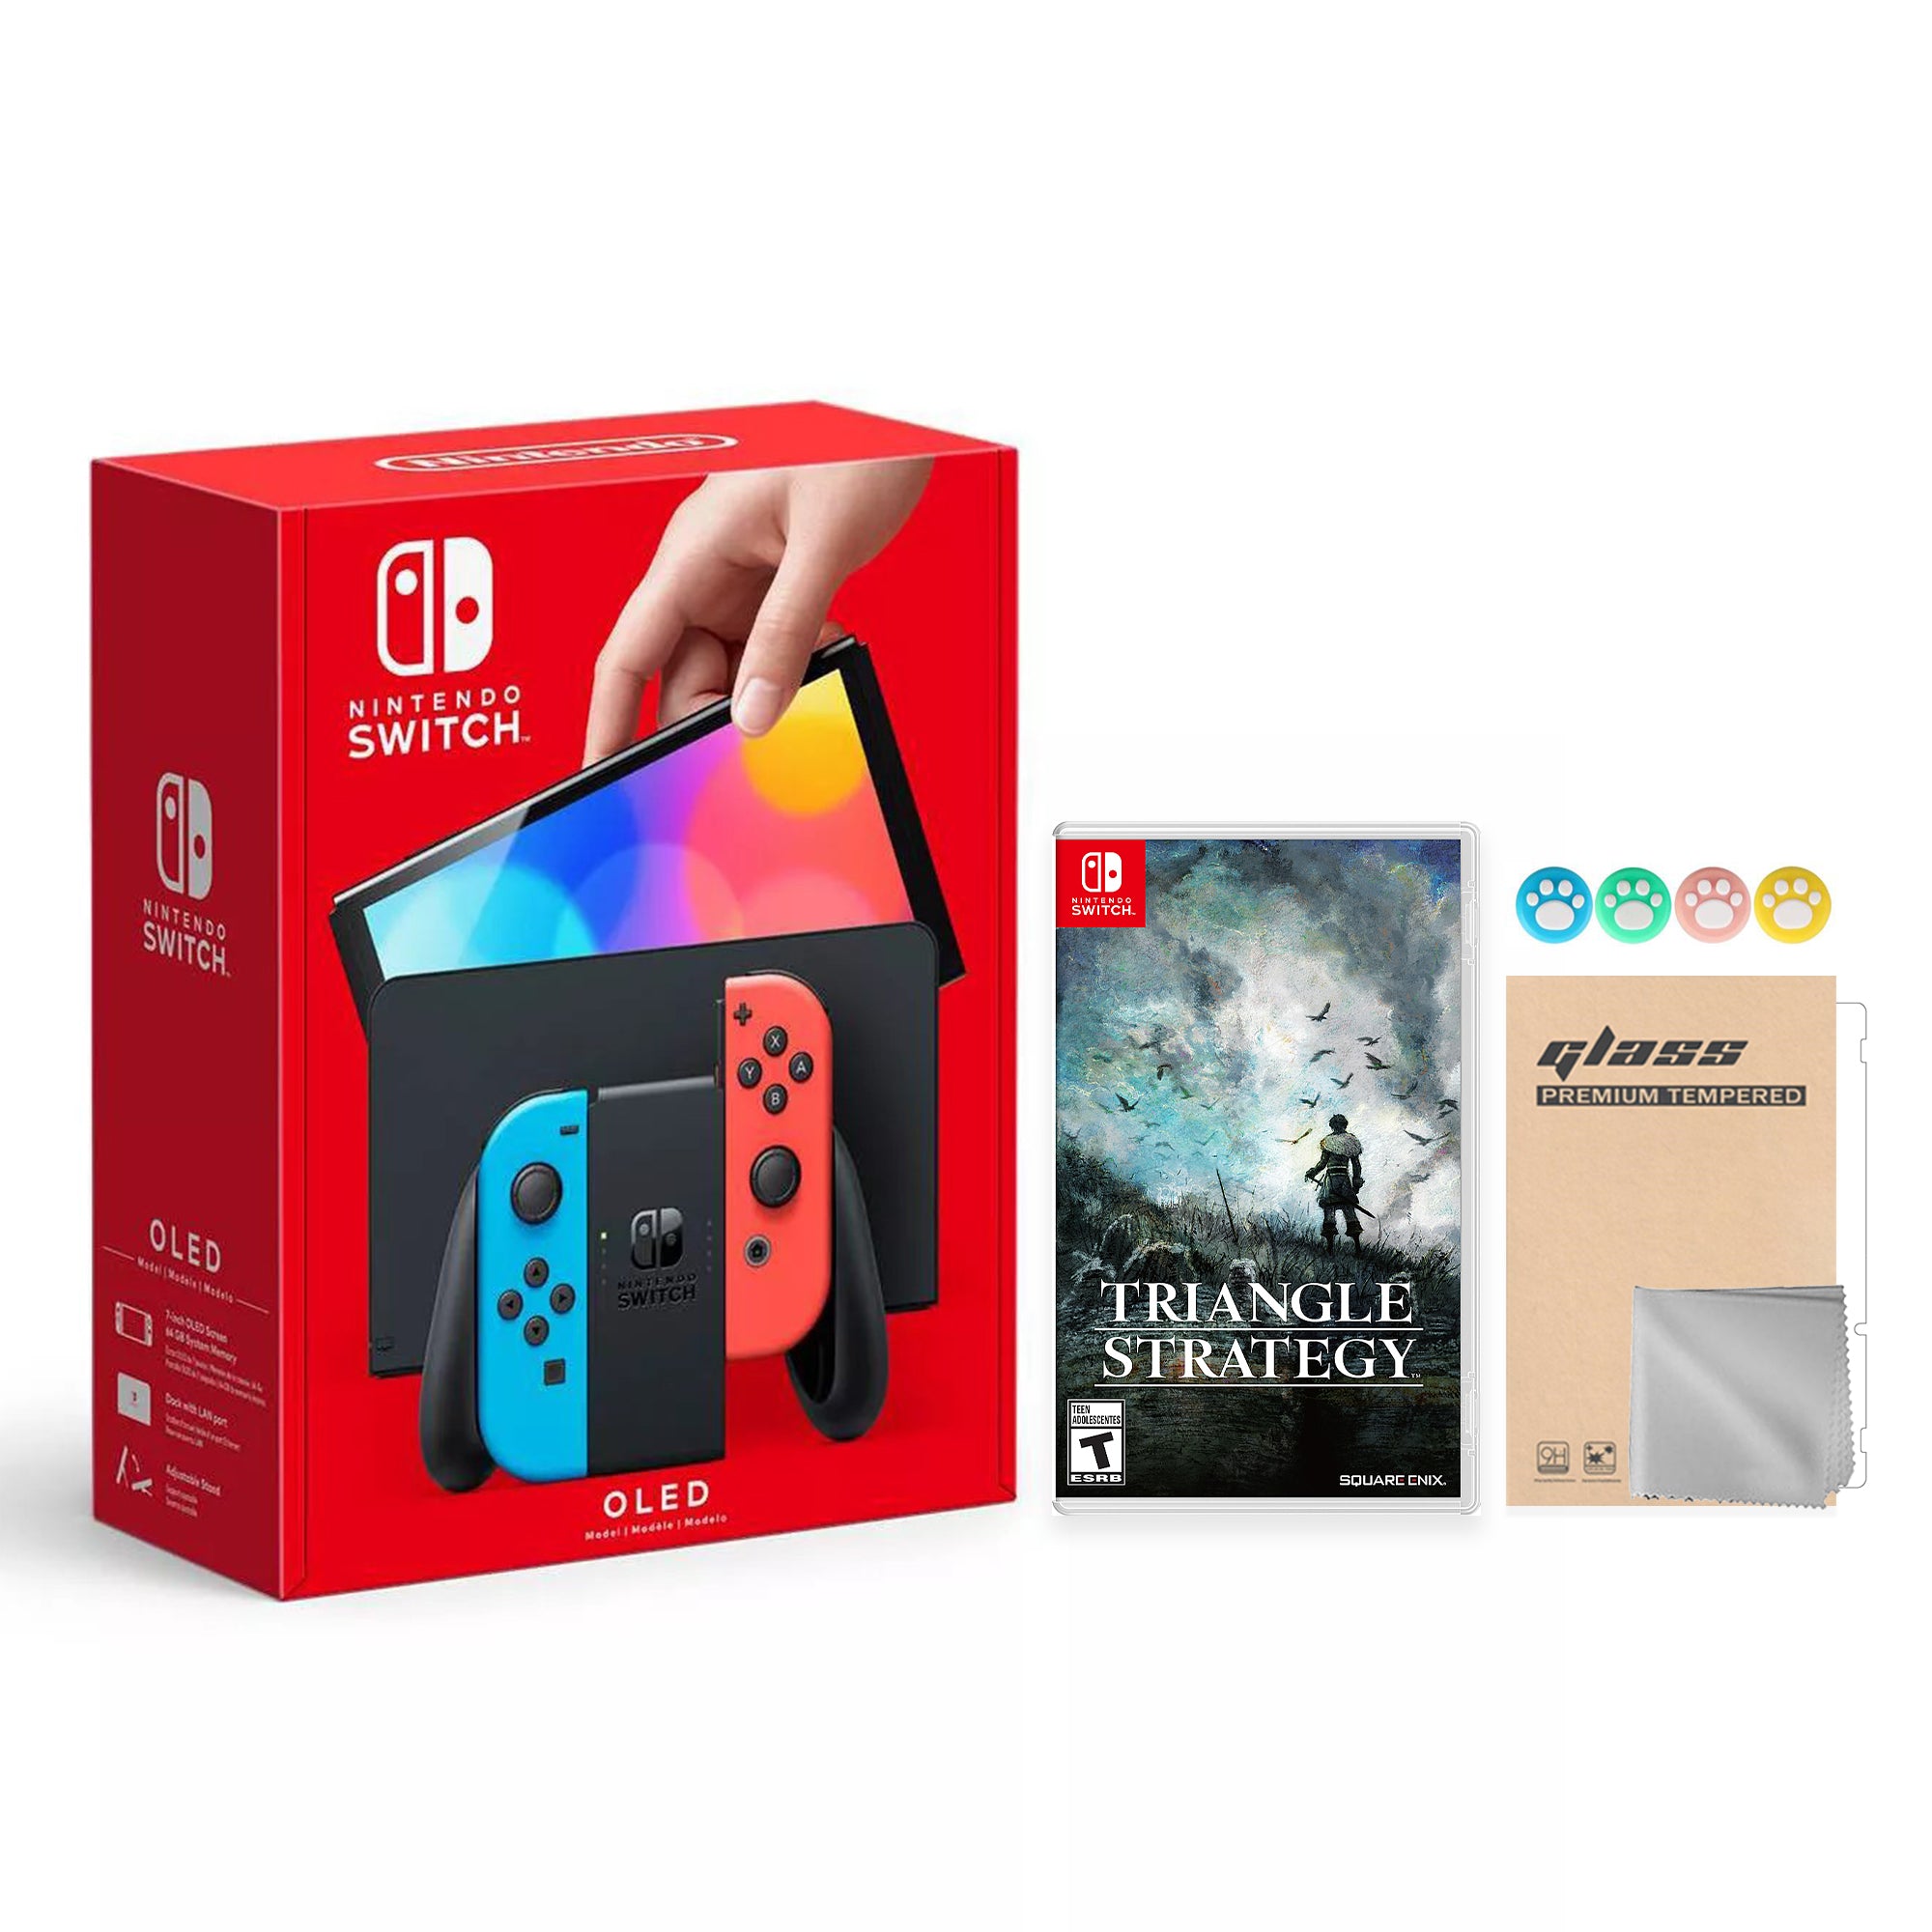 2022 New Nintendo Switch OLED Model Neon Red Blue Joy Con 64GB Console Improved HD Screen & LAN-Port Dock with Triangle Strategy, Mytrix Joystick Caps & Screen Protector